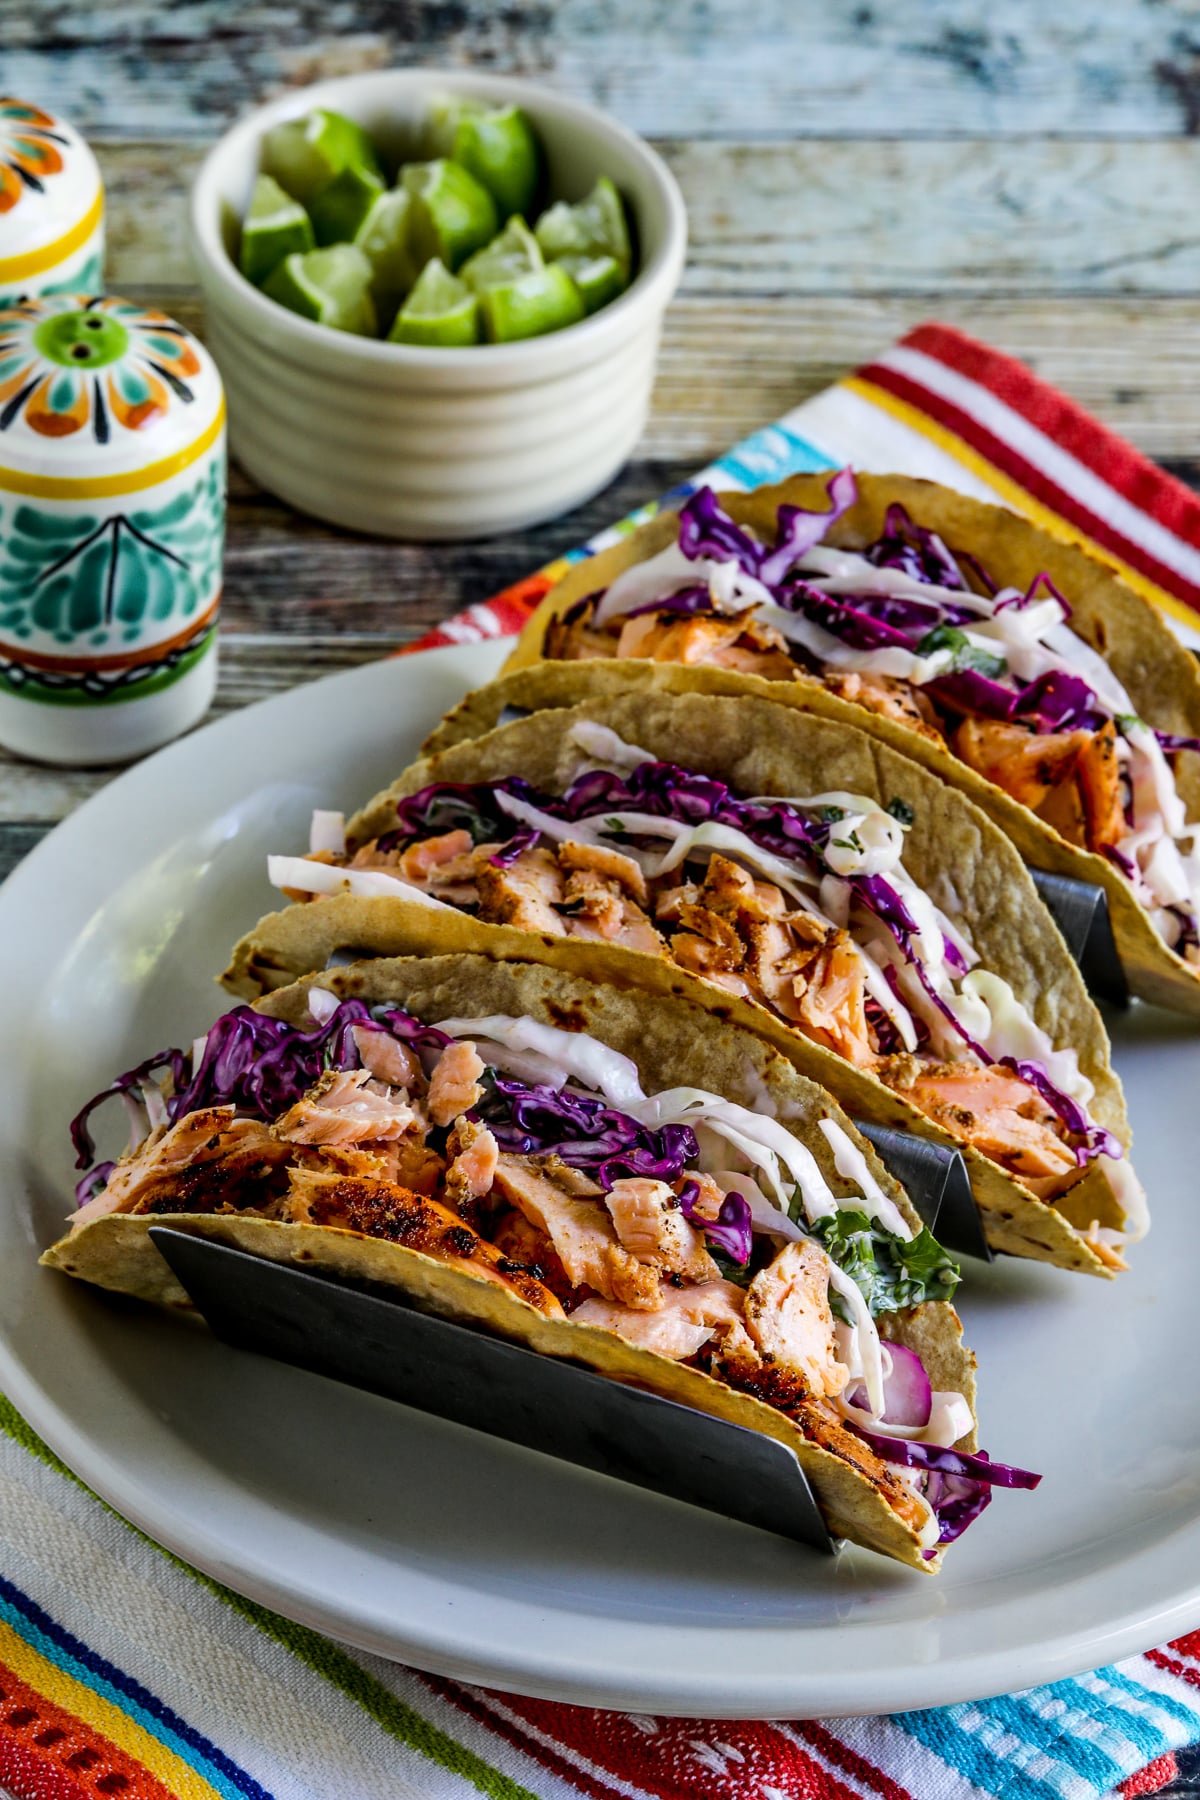 Salmon taco with mexican slaw displayed in a taco stand with limes on the side